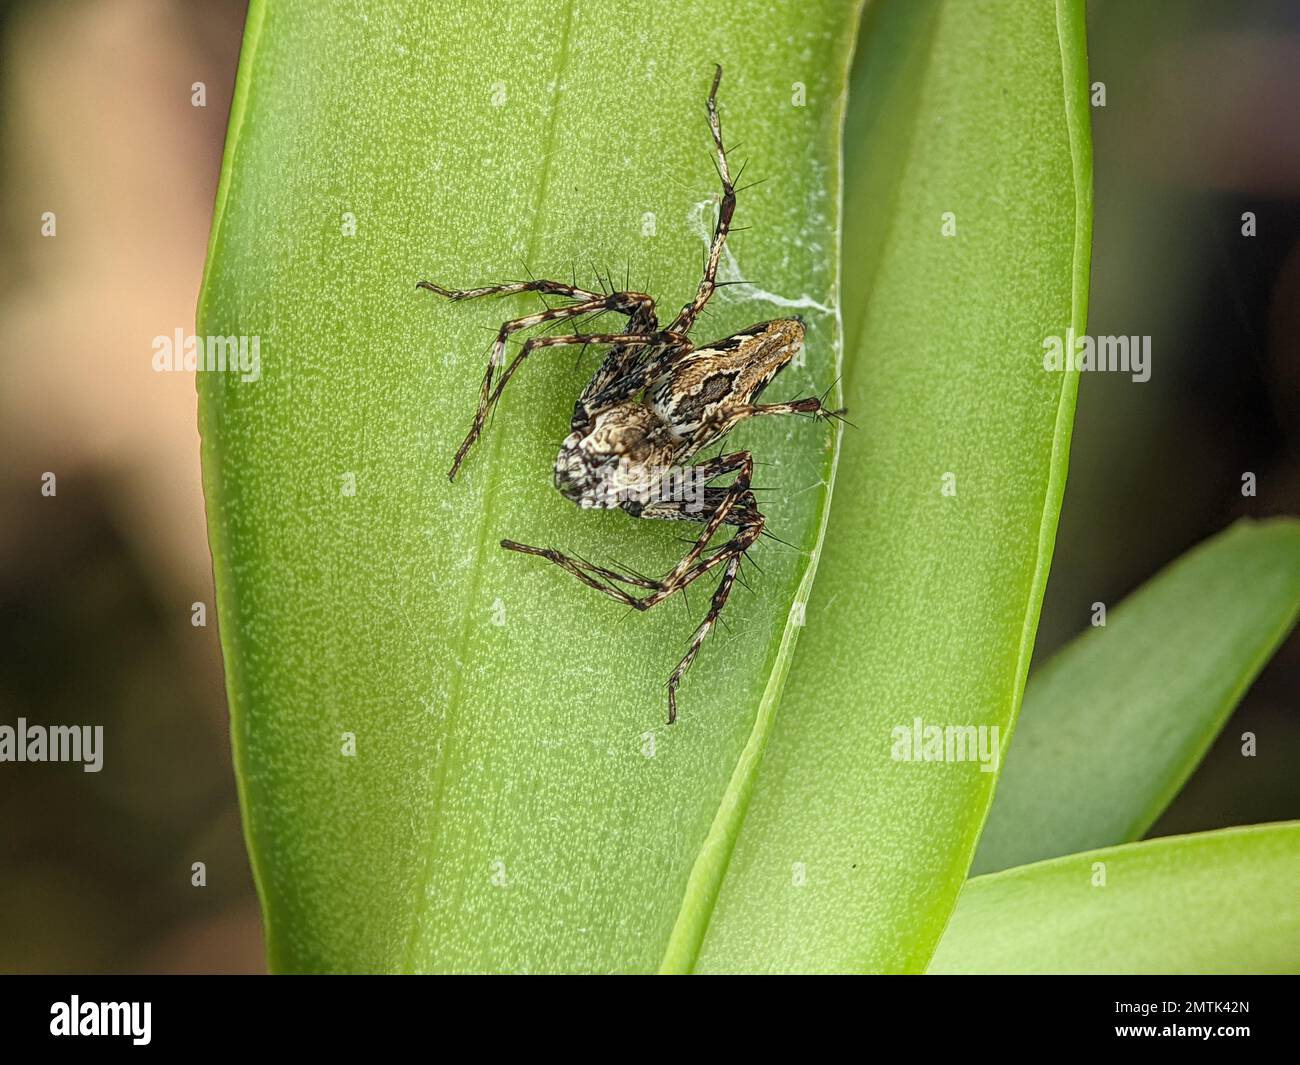 Big jumping spider on a leaf getting ready to pounce on prey in the form of insects Stock Photo